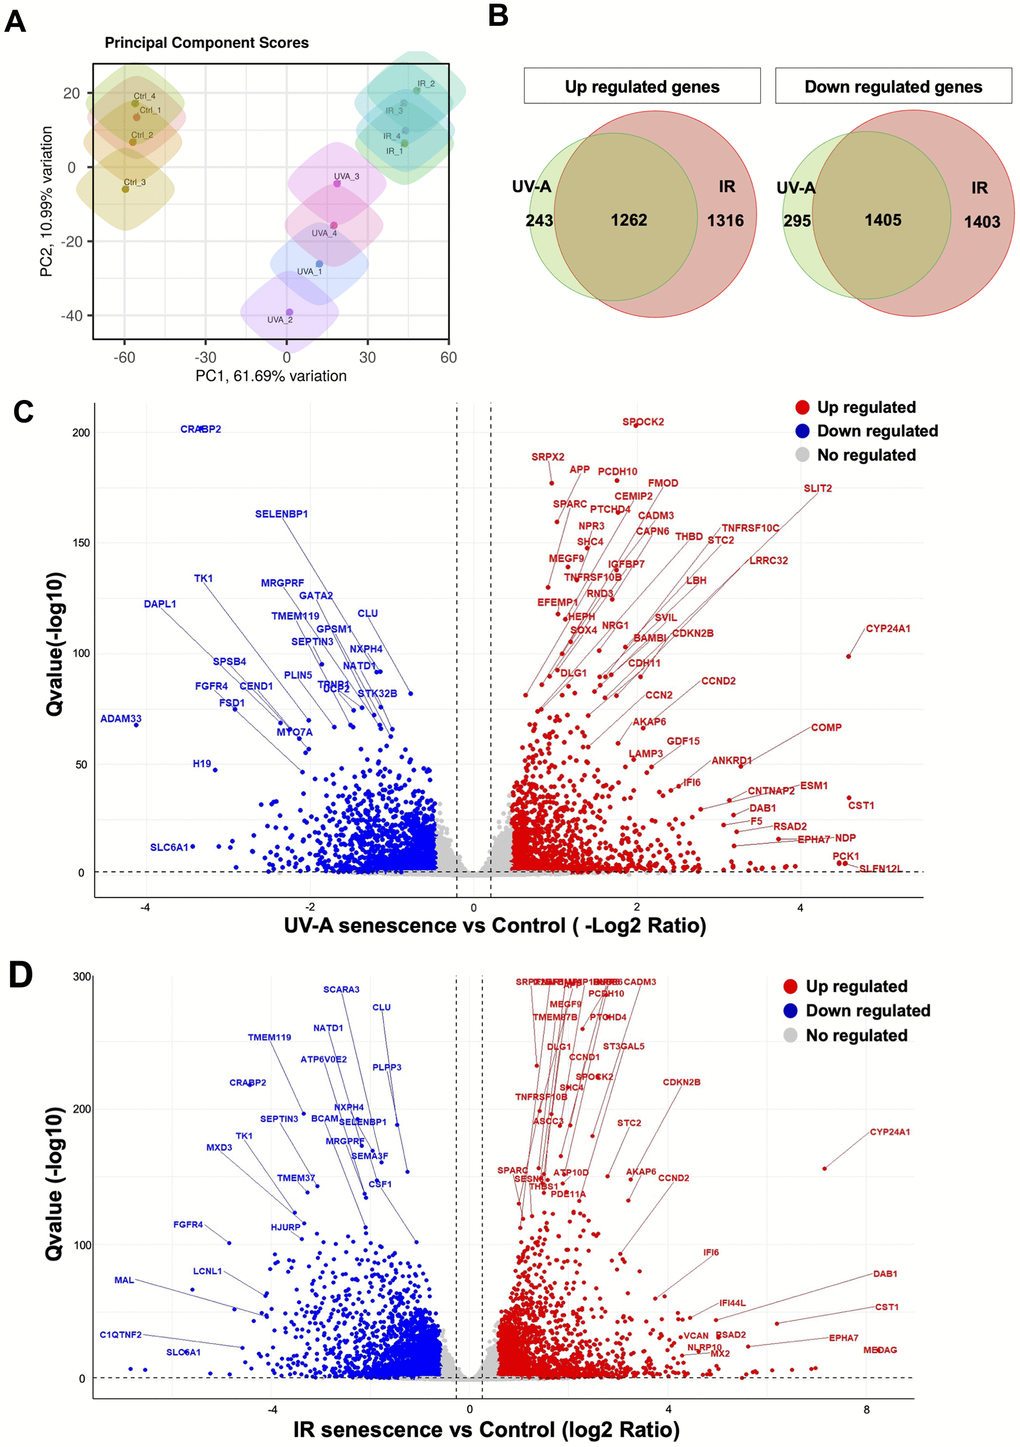 Comprehensive transcriptional analysis of UV-A- and IR-induced senescent human corneal endothelial cells. (A) Principal component score analysis of UV-A- and IR-induced senescent and non-senescent (control) hCEnCs (n=4, respectively). (B) Venn diagram analysis of differentially expressed genes upregulated (left) and downregulated (right) in UV-A- and IR-induced senescent hCEnCs compared to control (fold change ≥ 2, q-value ≤ 0.05). (C) Volcano plot comparing UV-A-induced senescent hCEnCs and control, and (D) Volcano plot comparing IR-induced senescent hCEnCs and control, show Q-values (−log10) vs. fold change of (log2) UV-A- or IR-induced senescent hCEnCs and control. Blue, downregulated genes; red, upregulated genes; and black, no significant change (fold change ≥ 2, q-value ≤ 0.05).